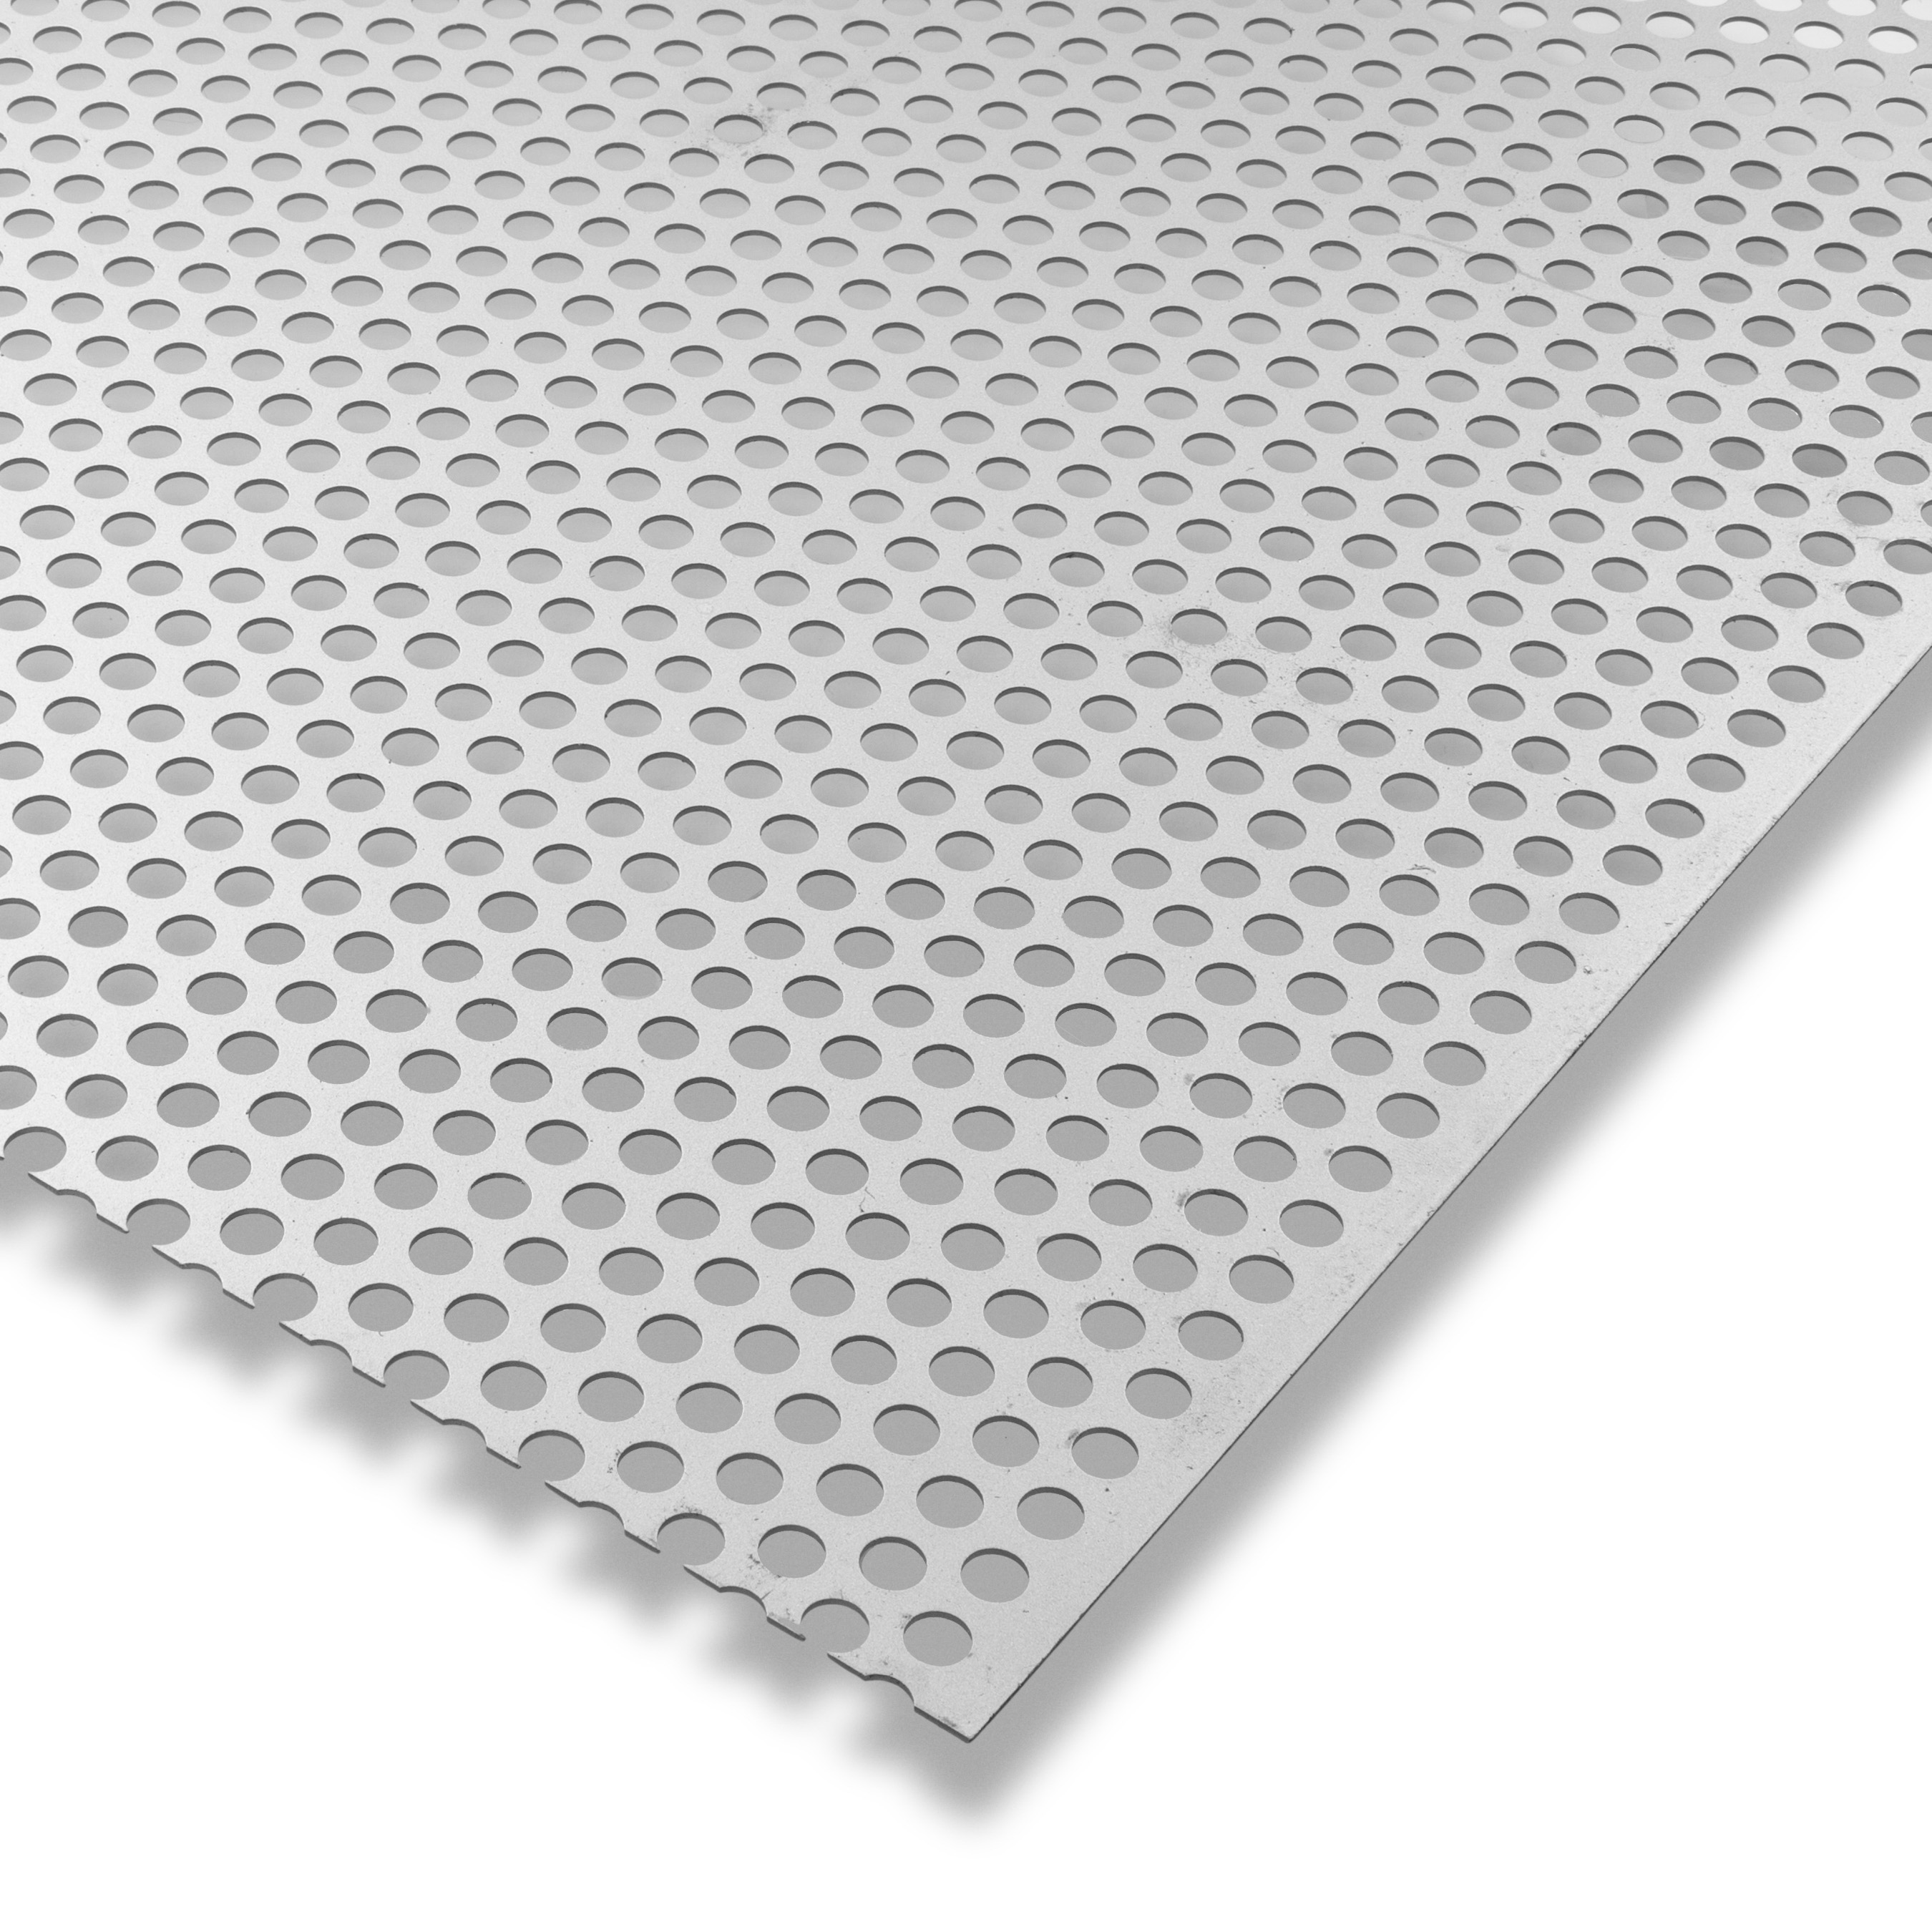 the perforated sheet